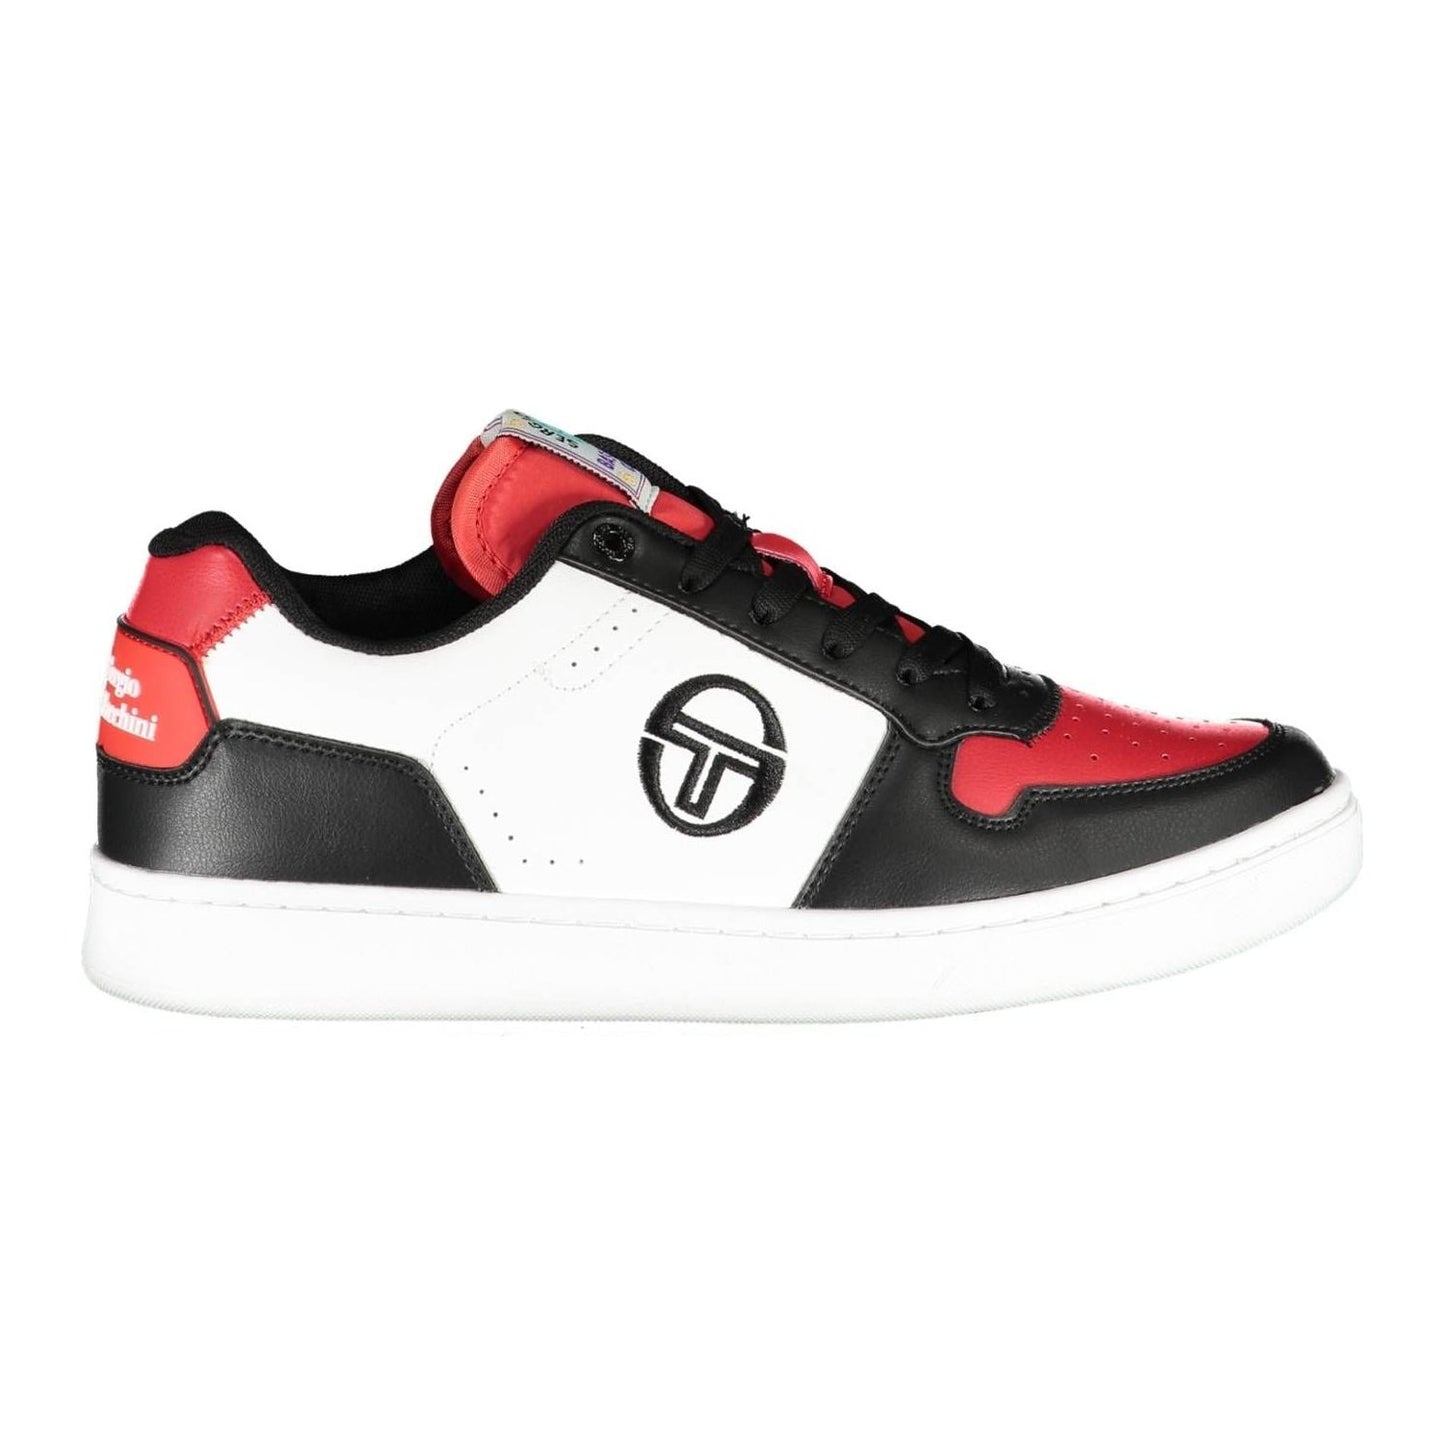 Chic Contrasting Lace-Up Sports Sneakers Sergio Tacchini